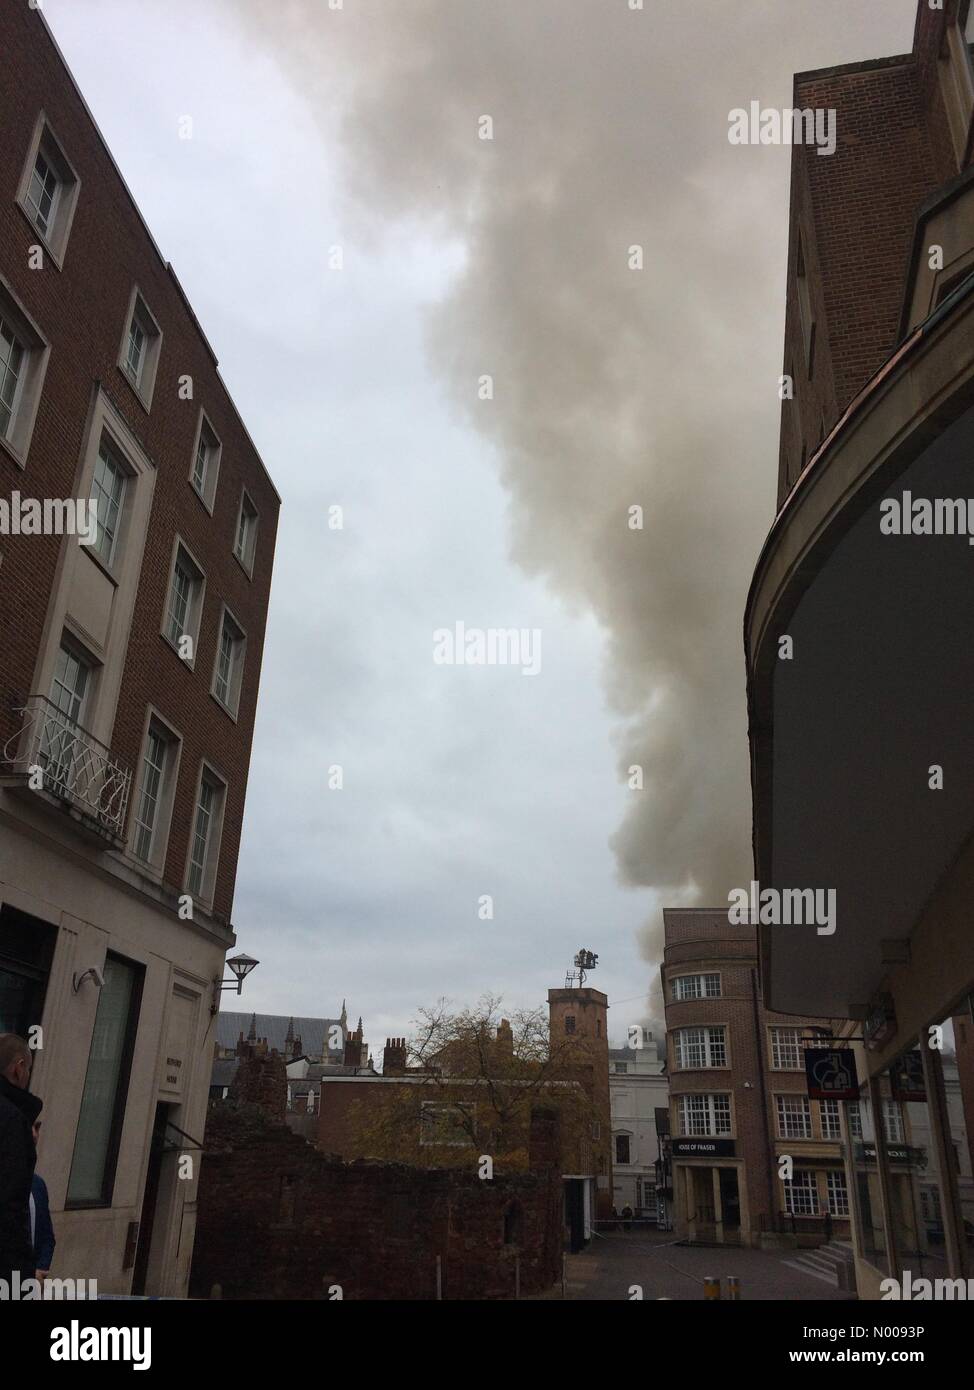 Exeter, UK. 28th Oct, 2016. Exeter, UK. 28th Oct, 2016. A devastating fire has broken out in the centre of Exeter, UK. The fire in Cathedral Square had appeared to be under control but has now spread to the nearby Clarence Hotel. Credit:  timandnic/StockimoNews/Alamy Live News Stock Photo